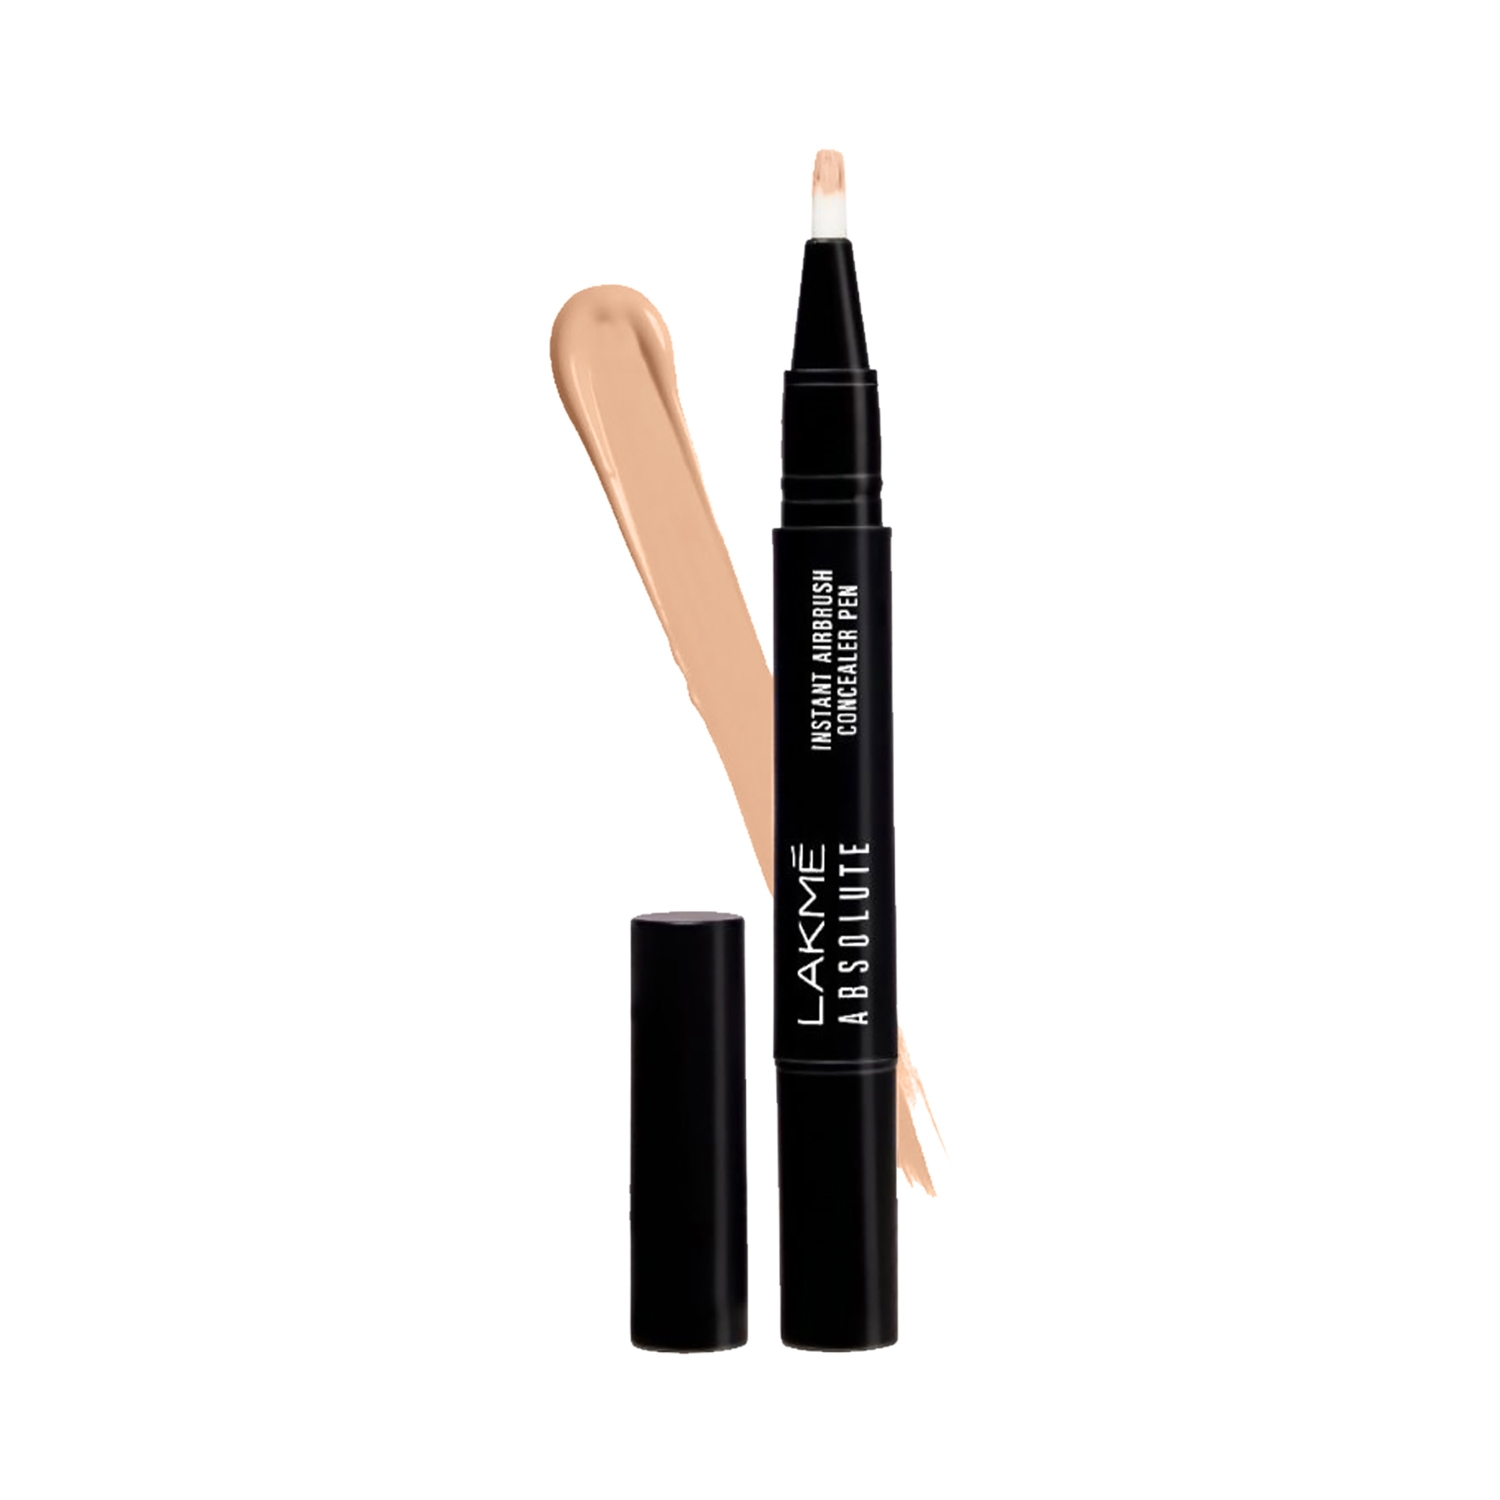 Lakme | Lakme Absolute Instant Airbrush Concealer Pen - Ivory (1.8g)